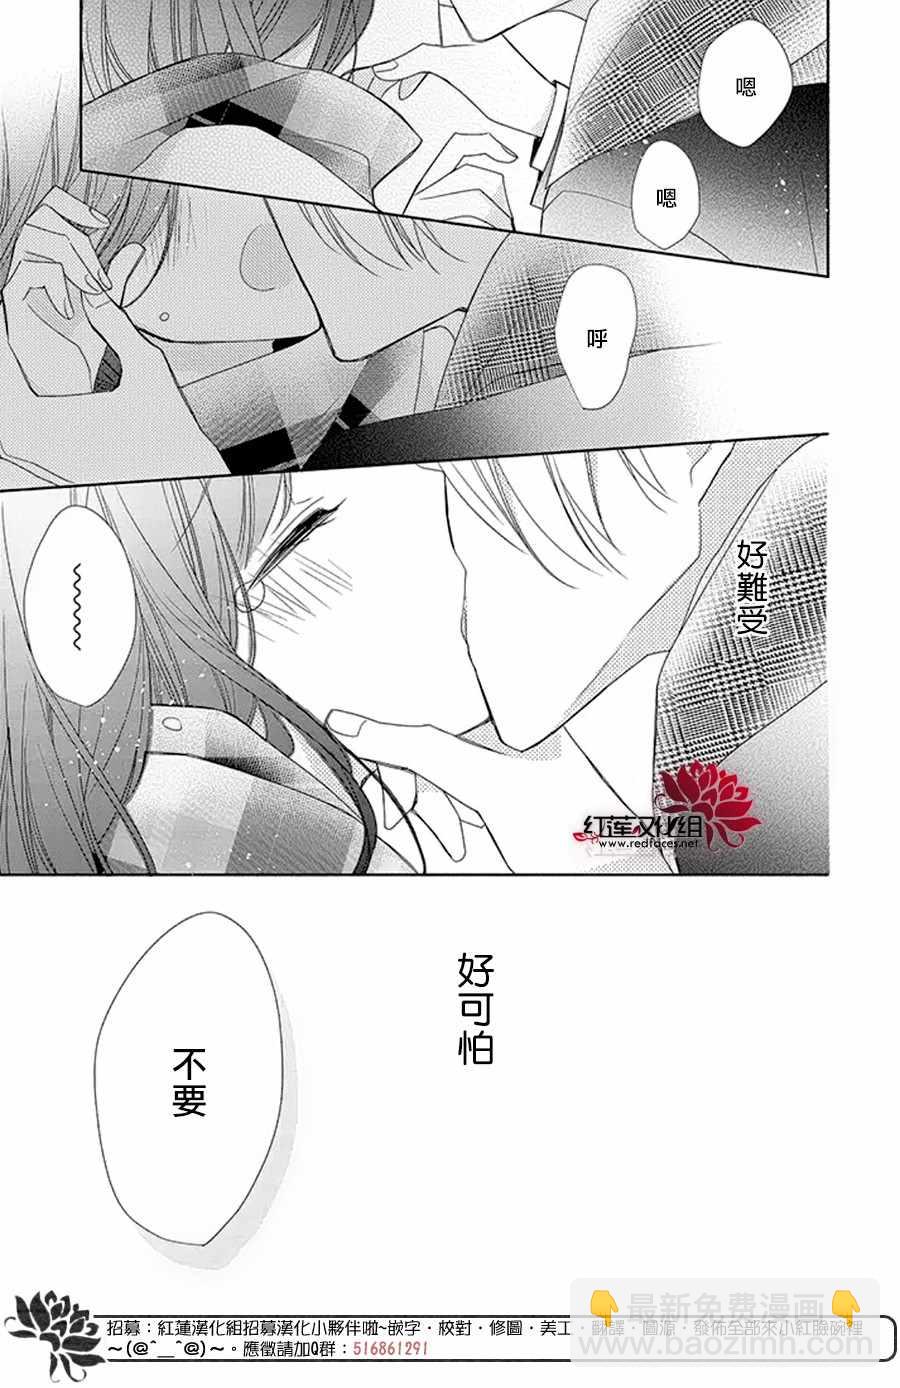 If given a second chance - 18话 - 2